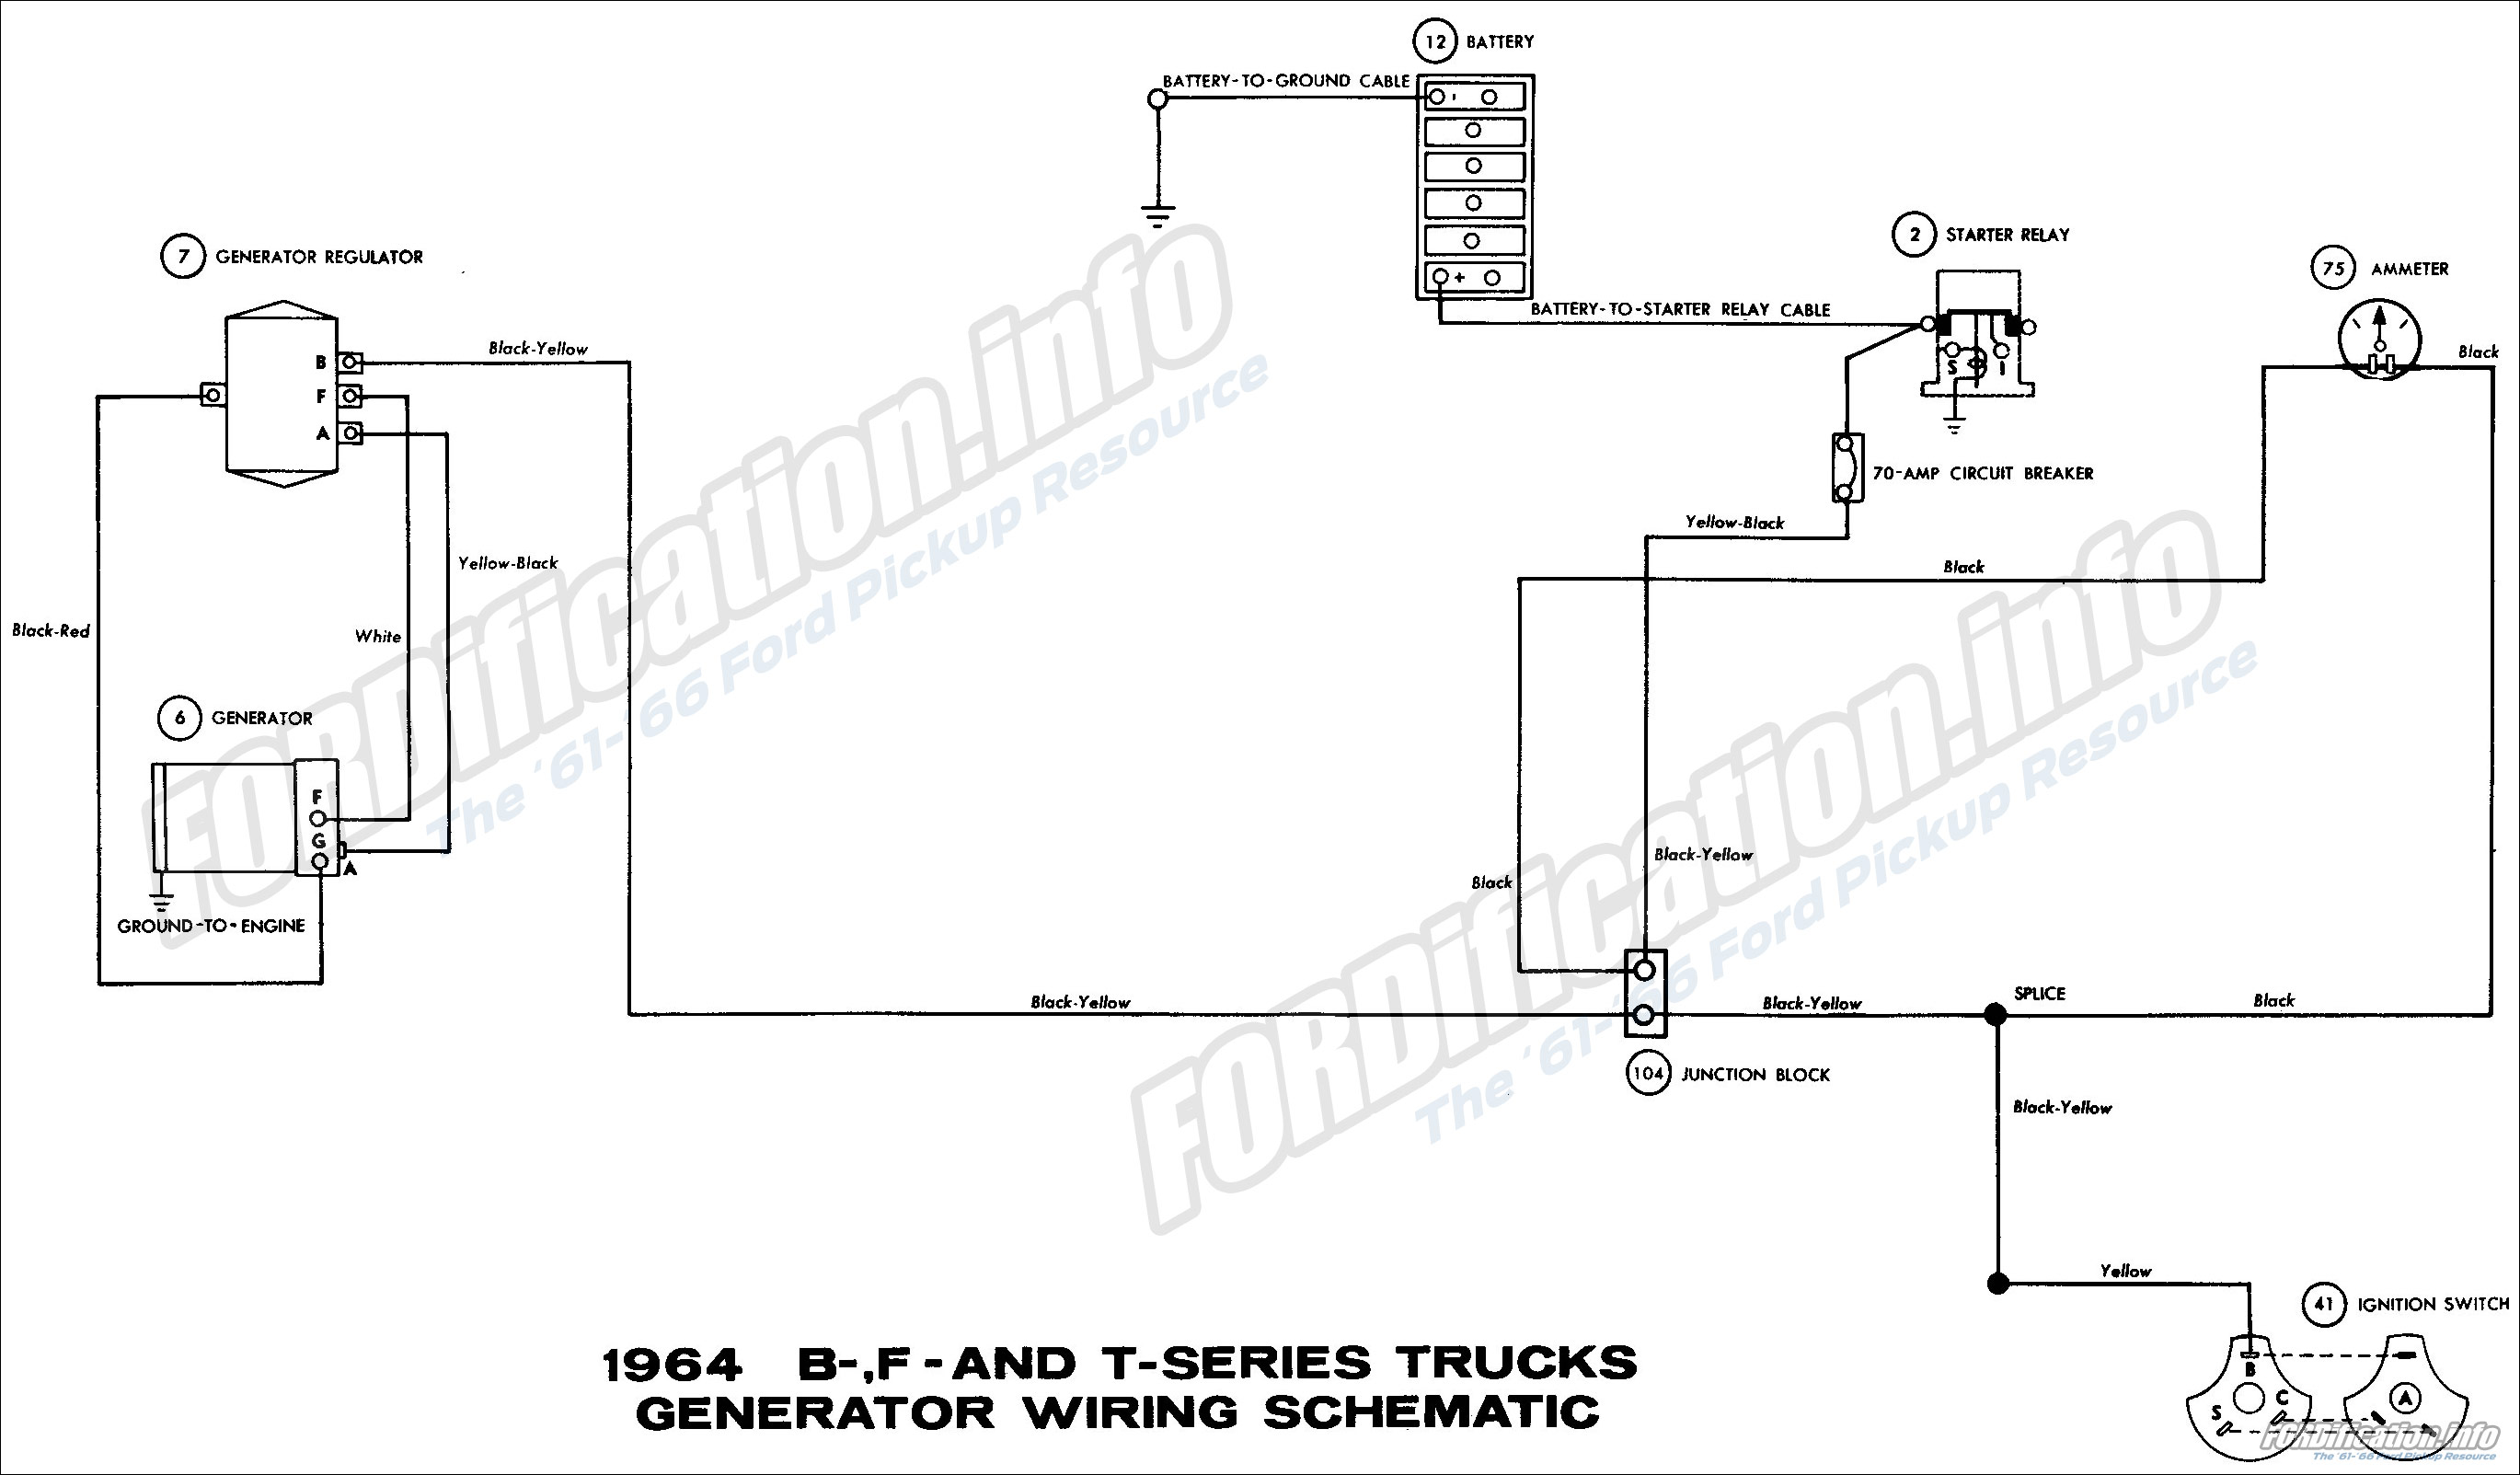 1964 Ford Truck Wiring Diagrams - FORDification.info - The ... 1953 ford truck wiring diagrams 